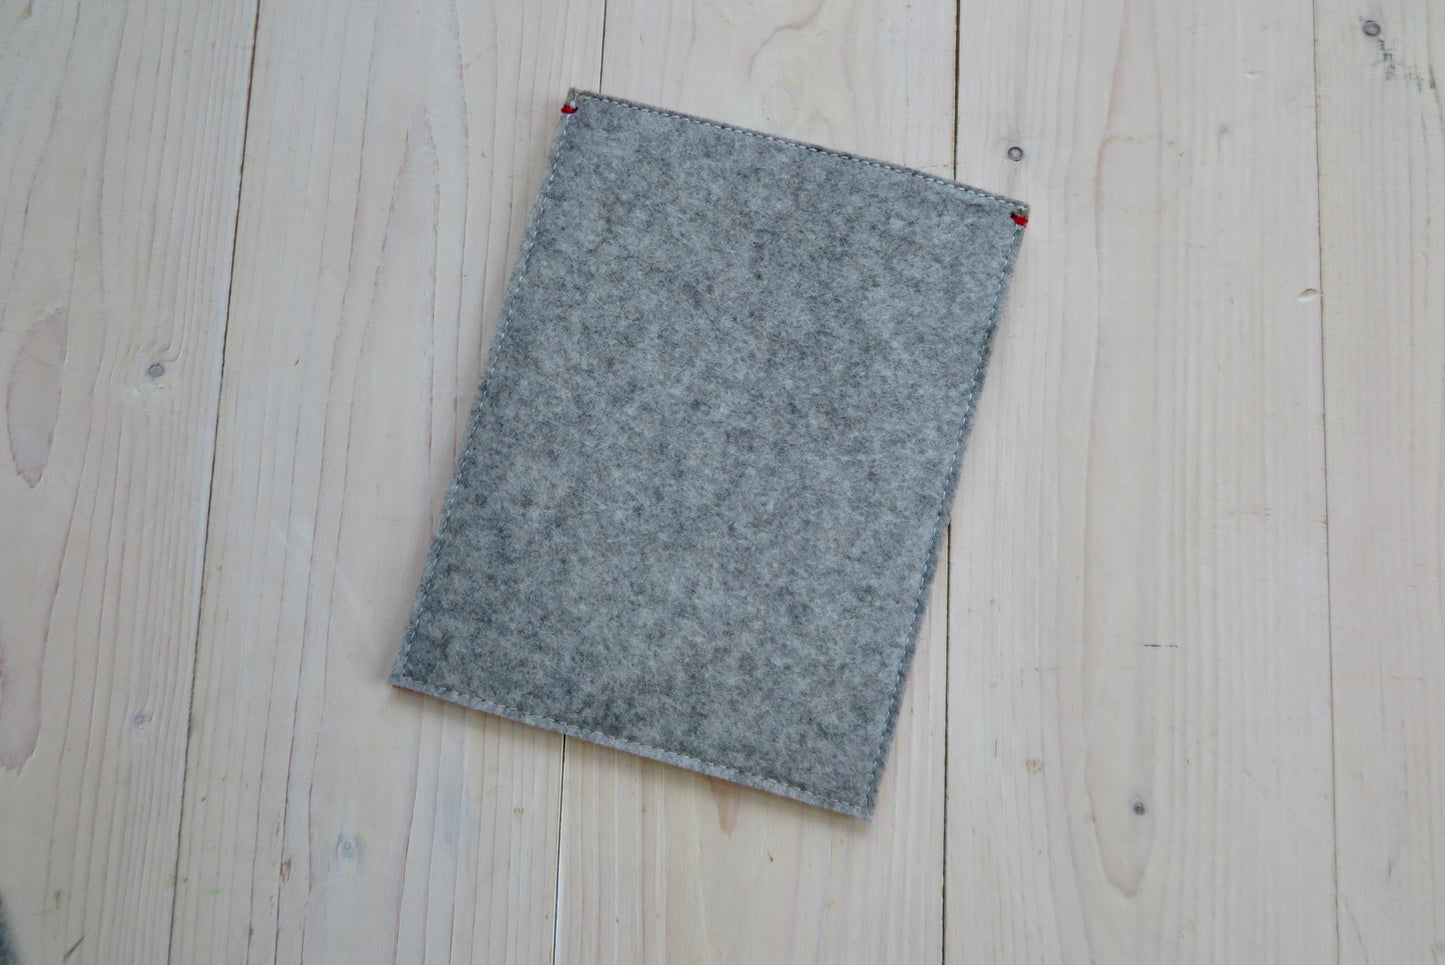 Contrast ereader cover for Kobo or Kindle in gray and yellow felt